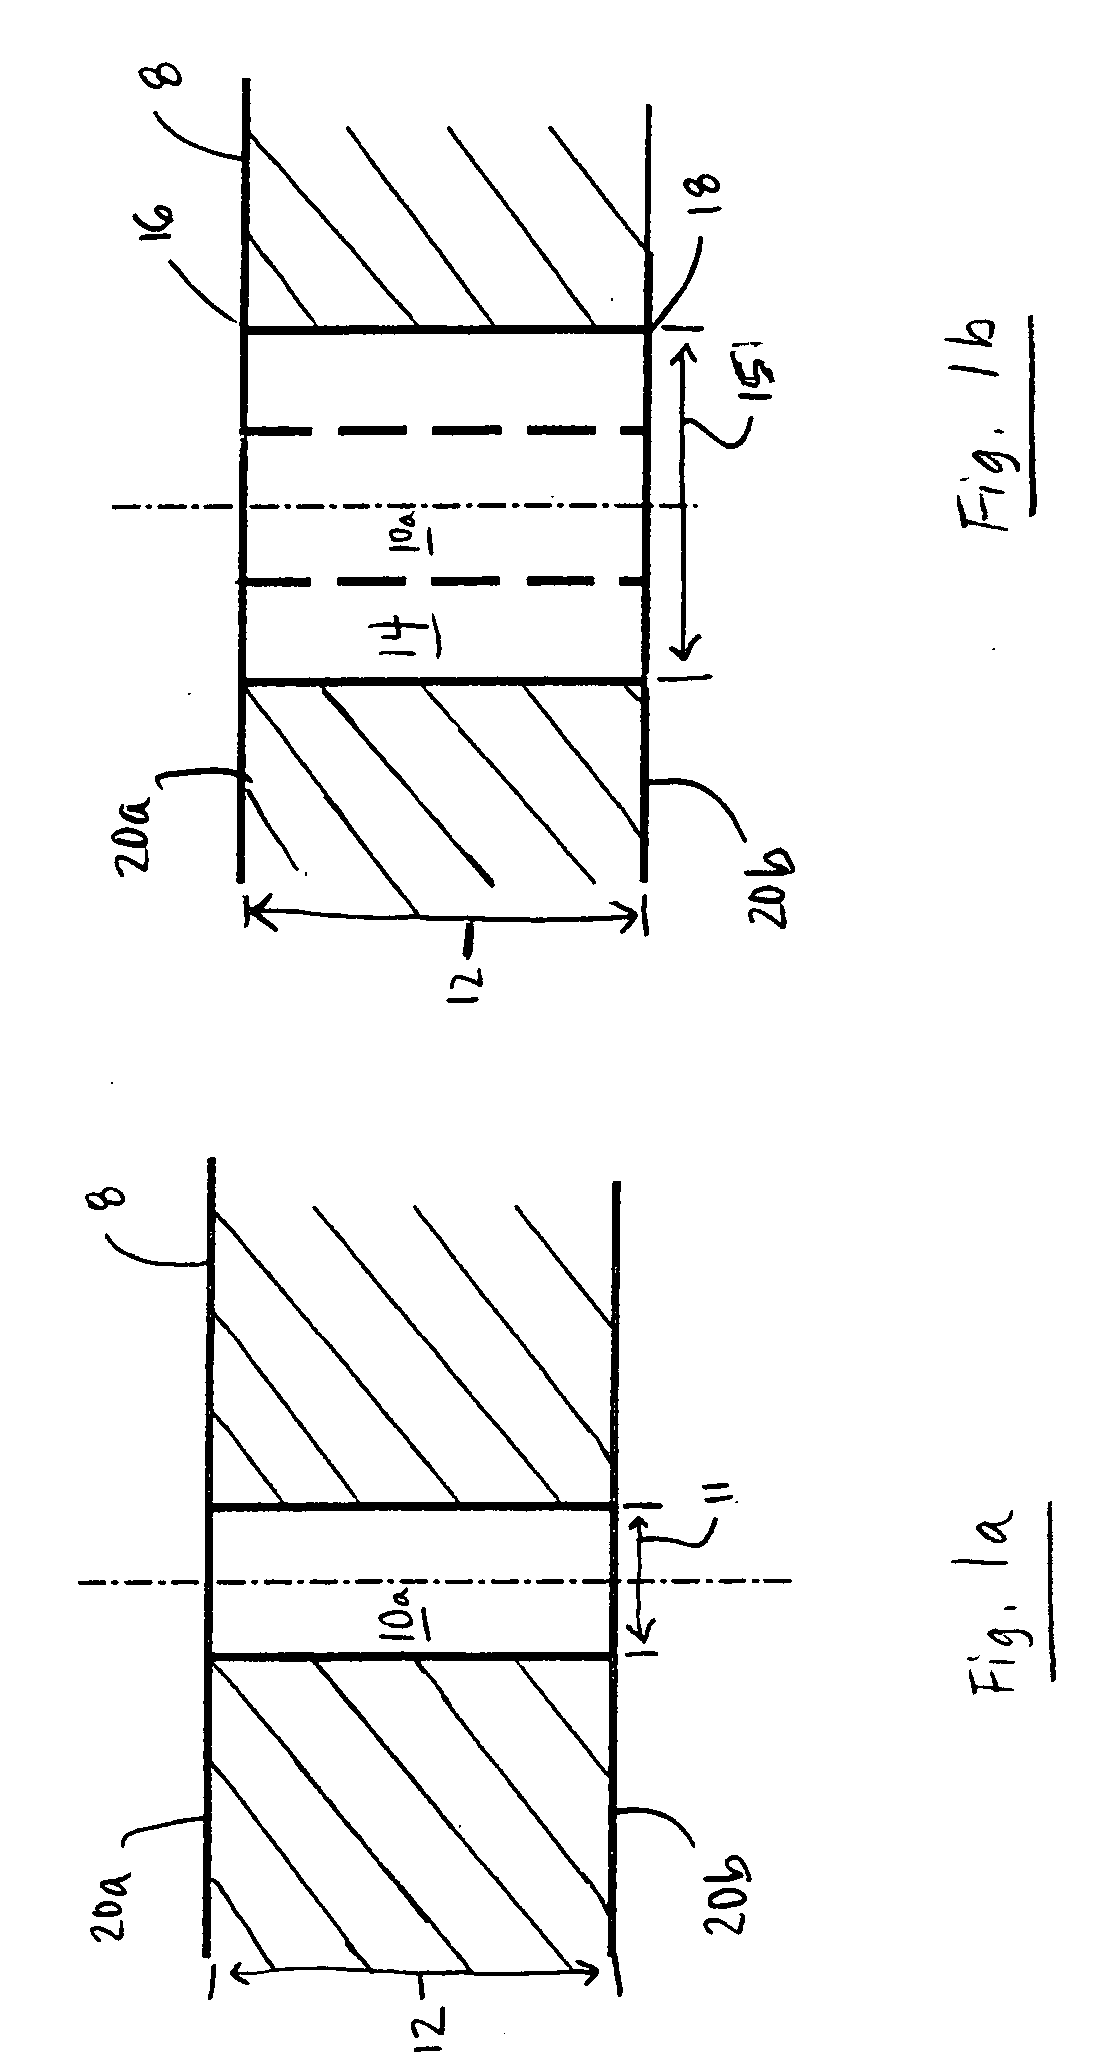 Methods of drilling through-holes in homogenous and non-homogeneous substrates